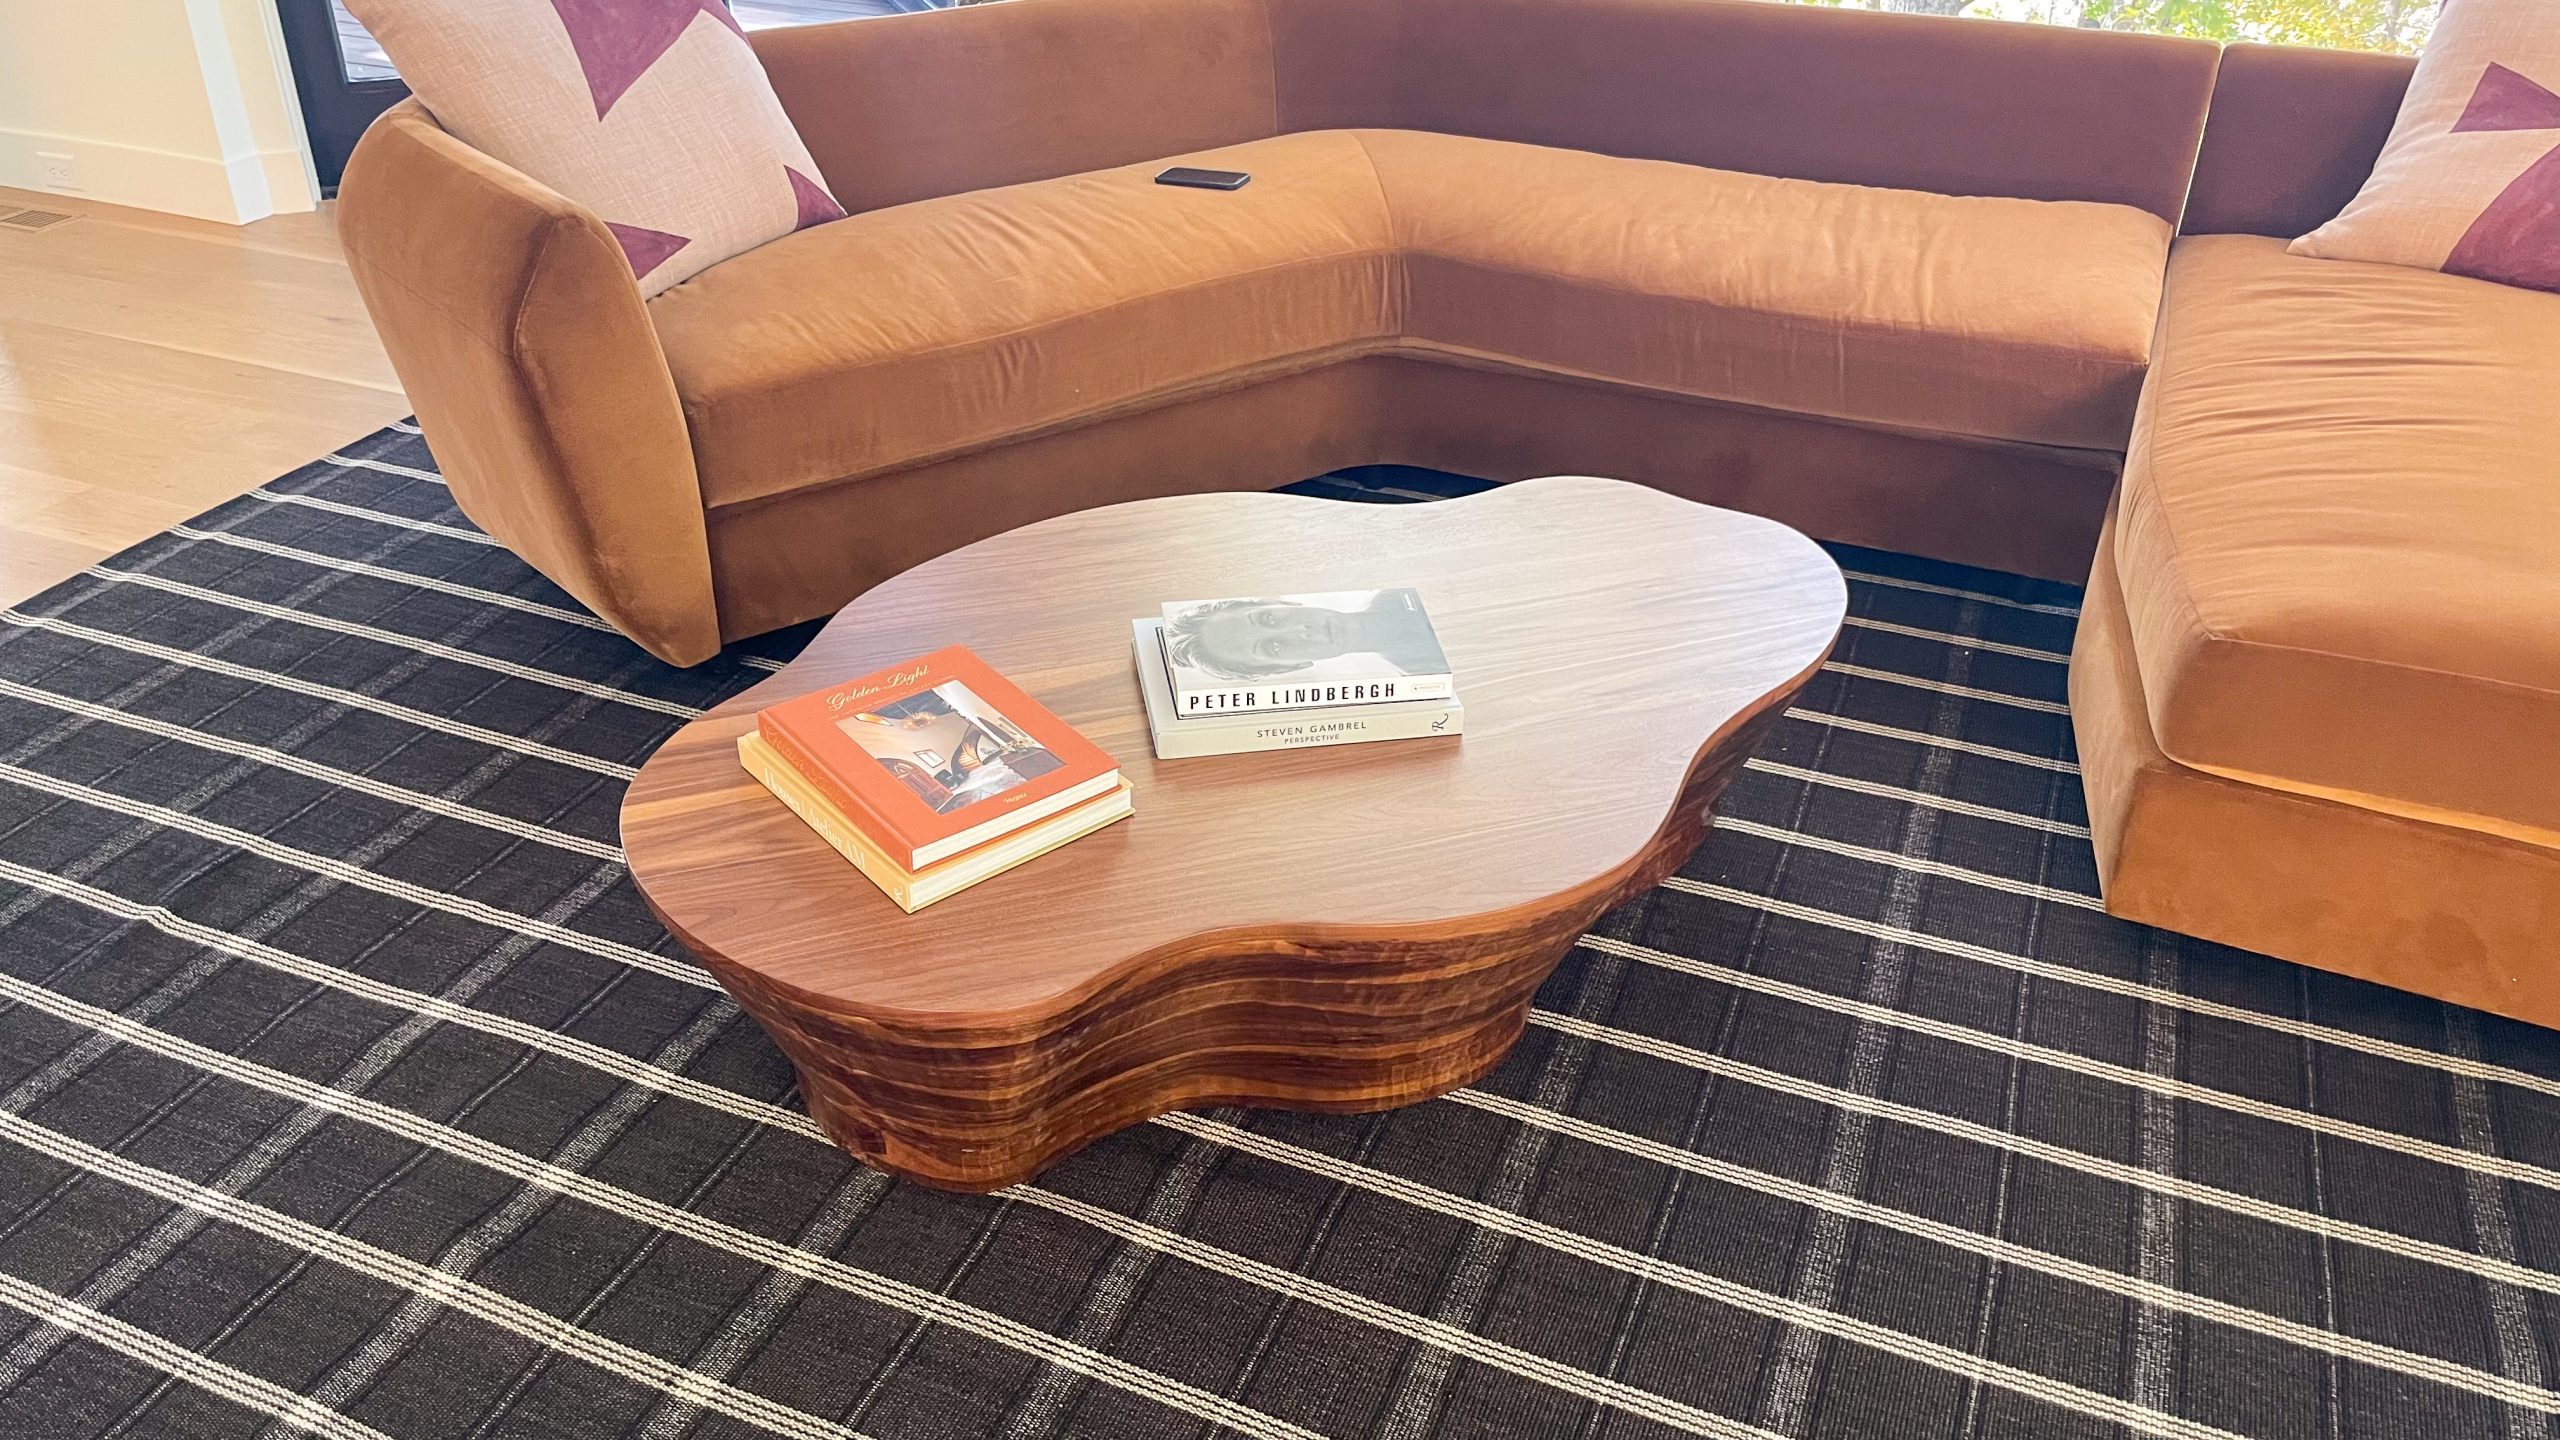 Organic shaped walnut coffee table close up with books